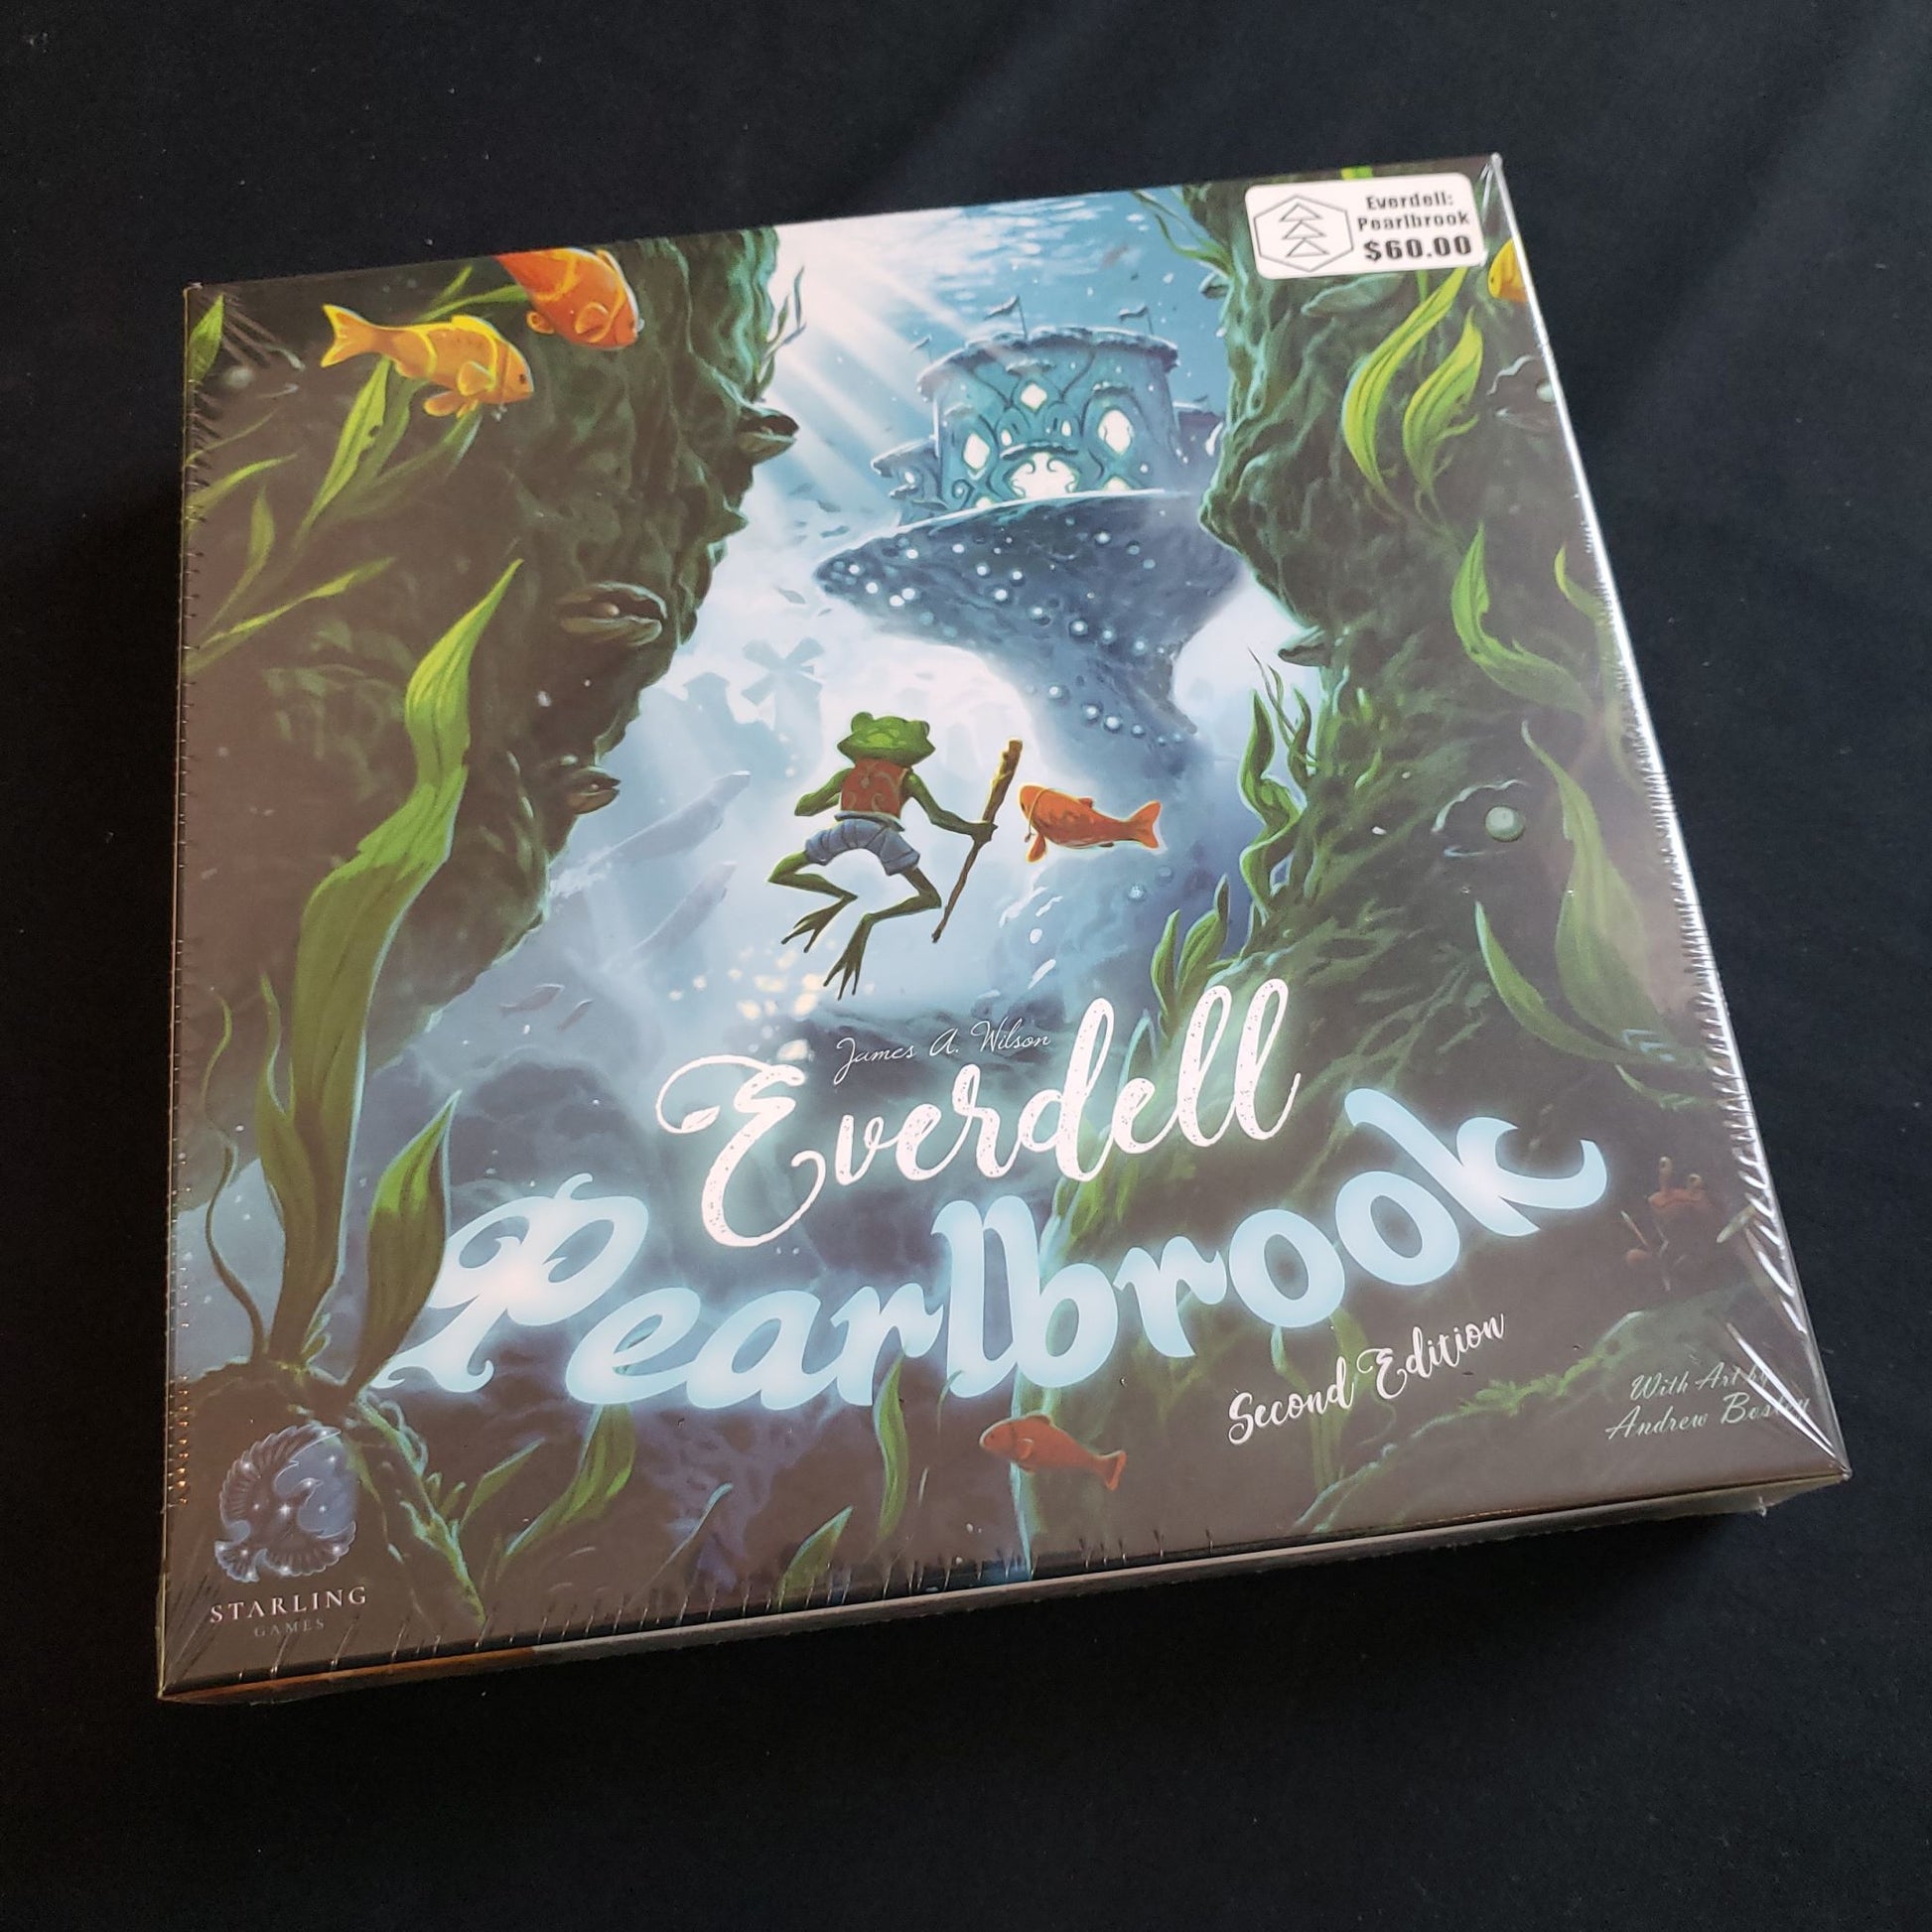 Everdell board game: Pearlbrook expansion - front cover of box